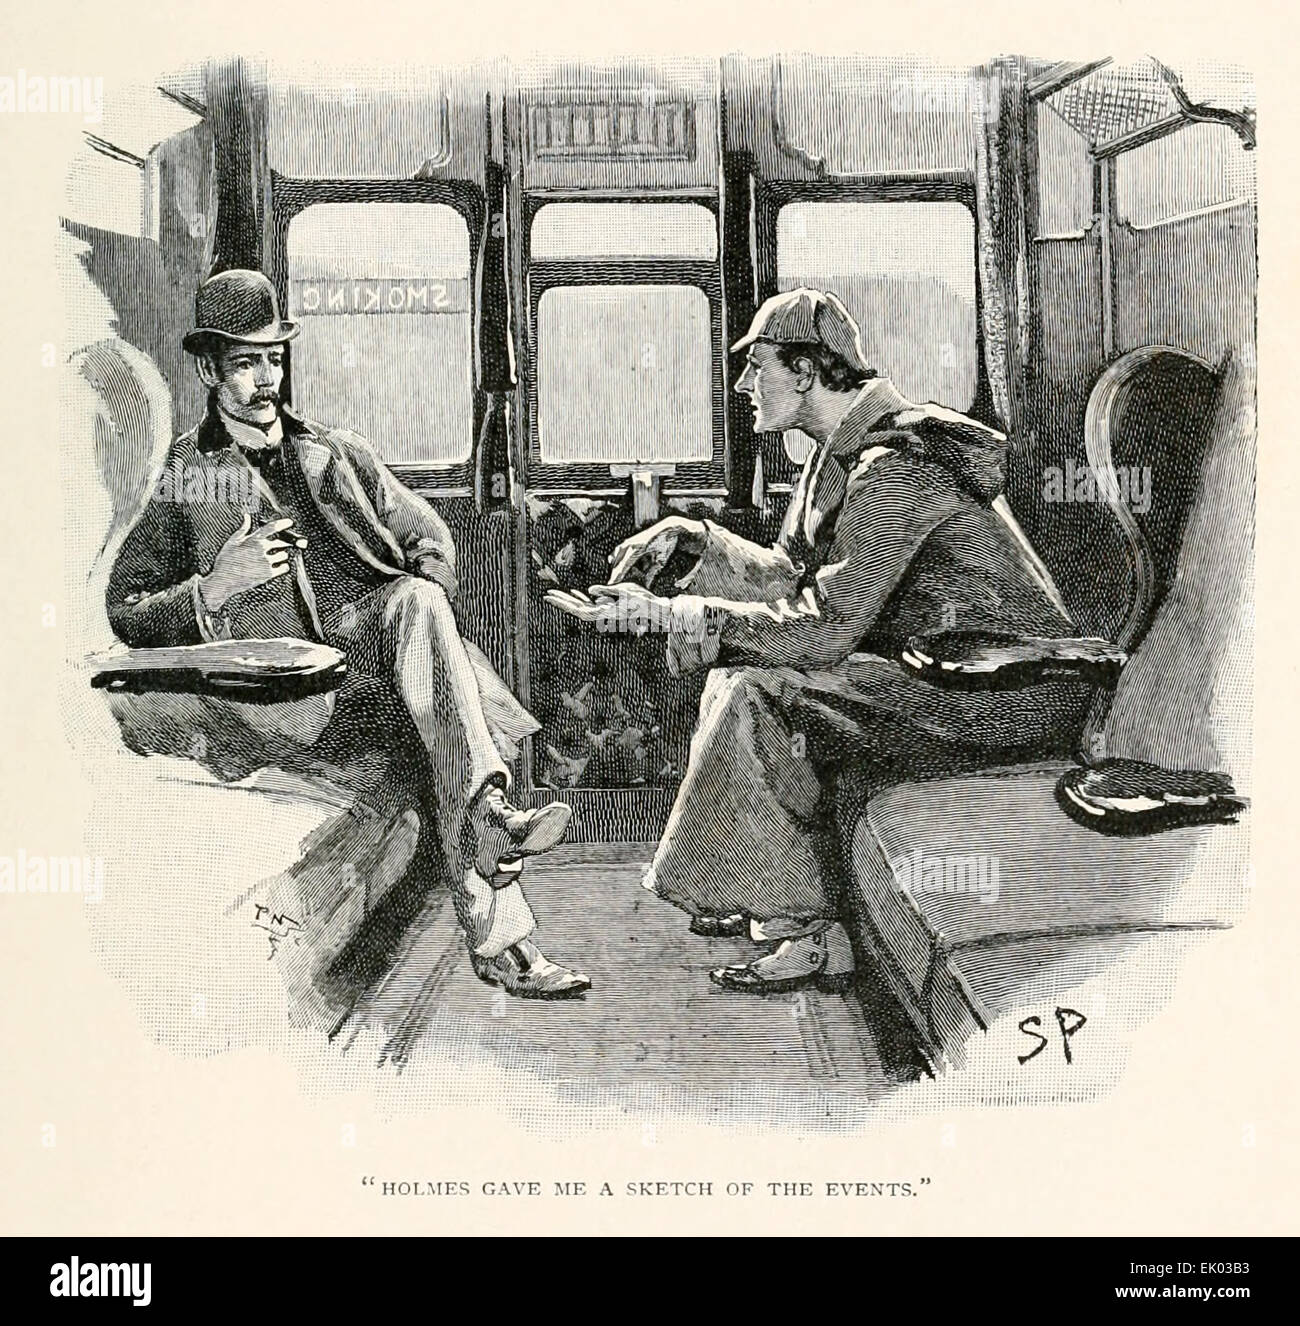 Holmes Gave me a Sketch of the Events - from 'The Adventure of Silver Blaze' by Arthur Conan Doyle (1859-1930). Illustration by Sidney Paget (1860-1908) from 1892 edition of The Strand Magazine. See description for more information. Stock Photo